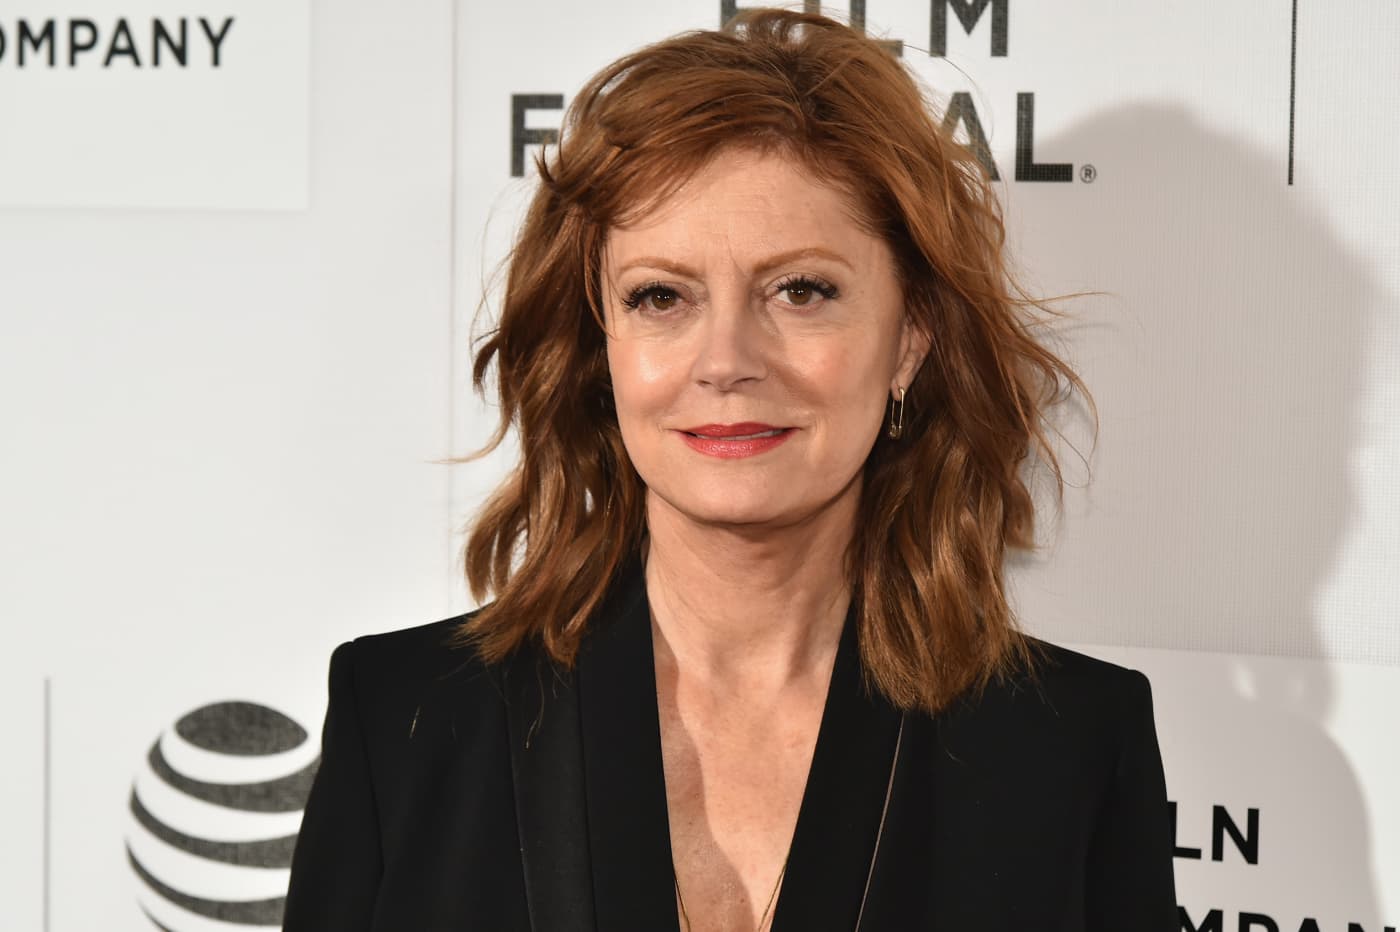 #Susan Sarandon’s NYC duplex sold quickly for .9 million